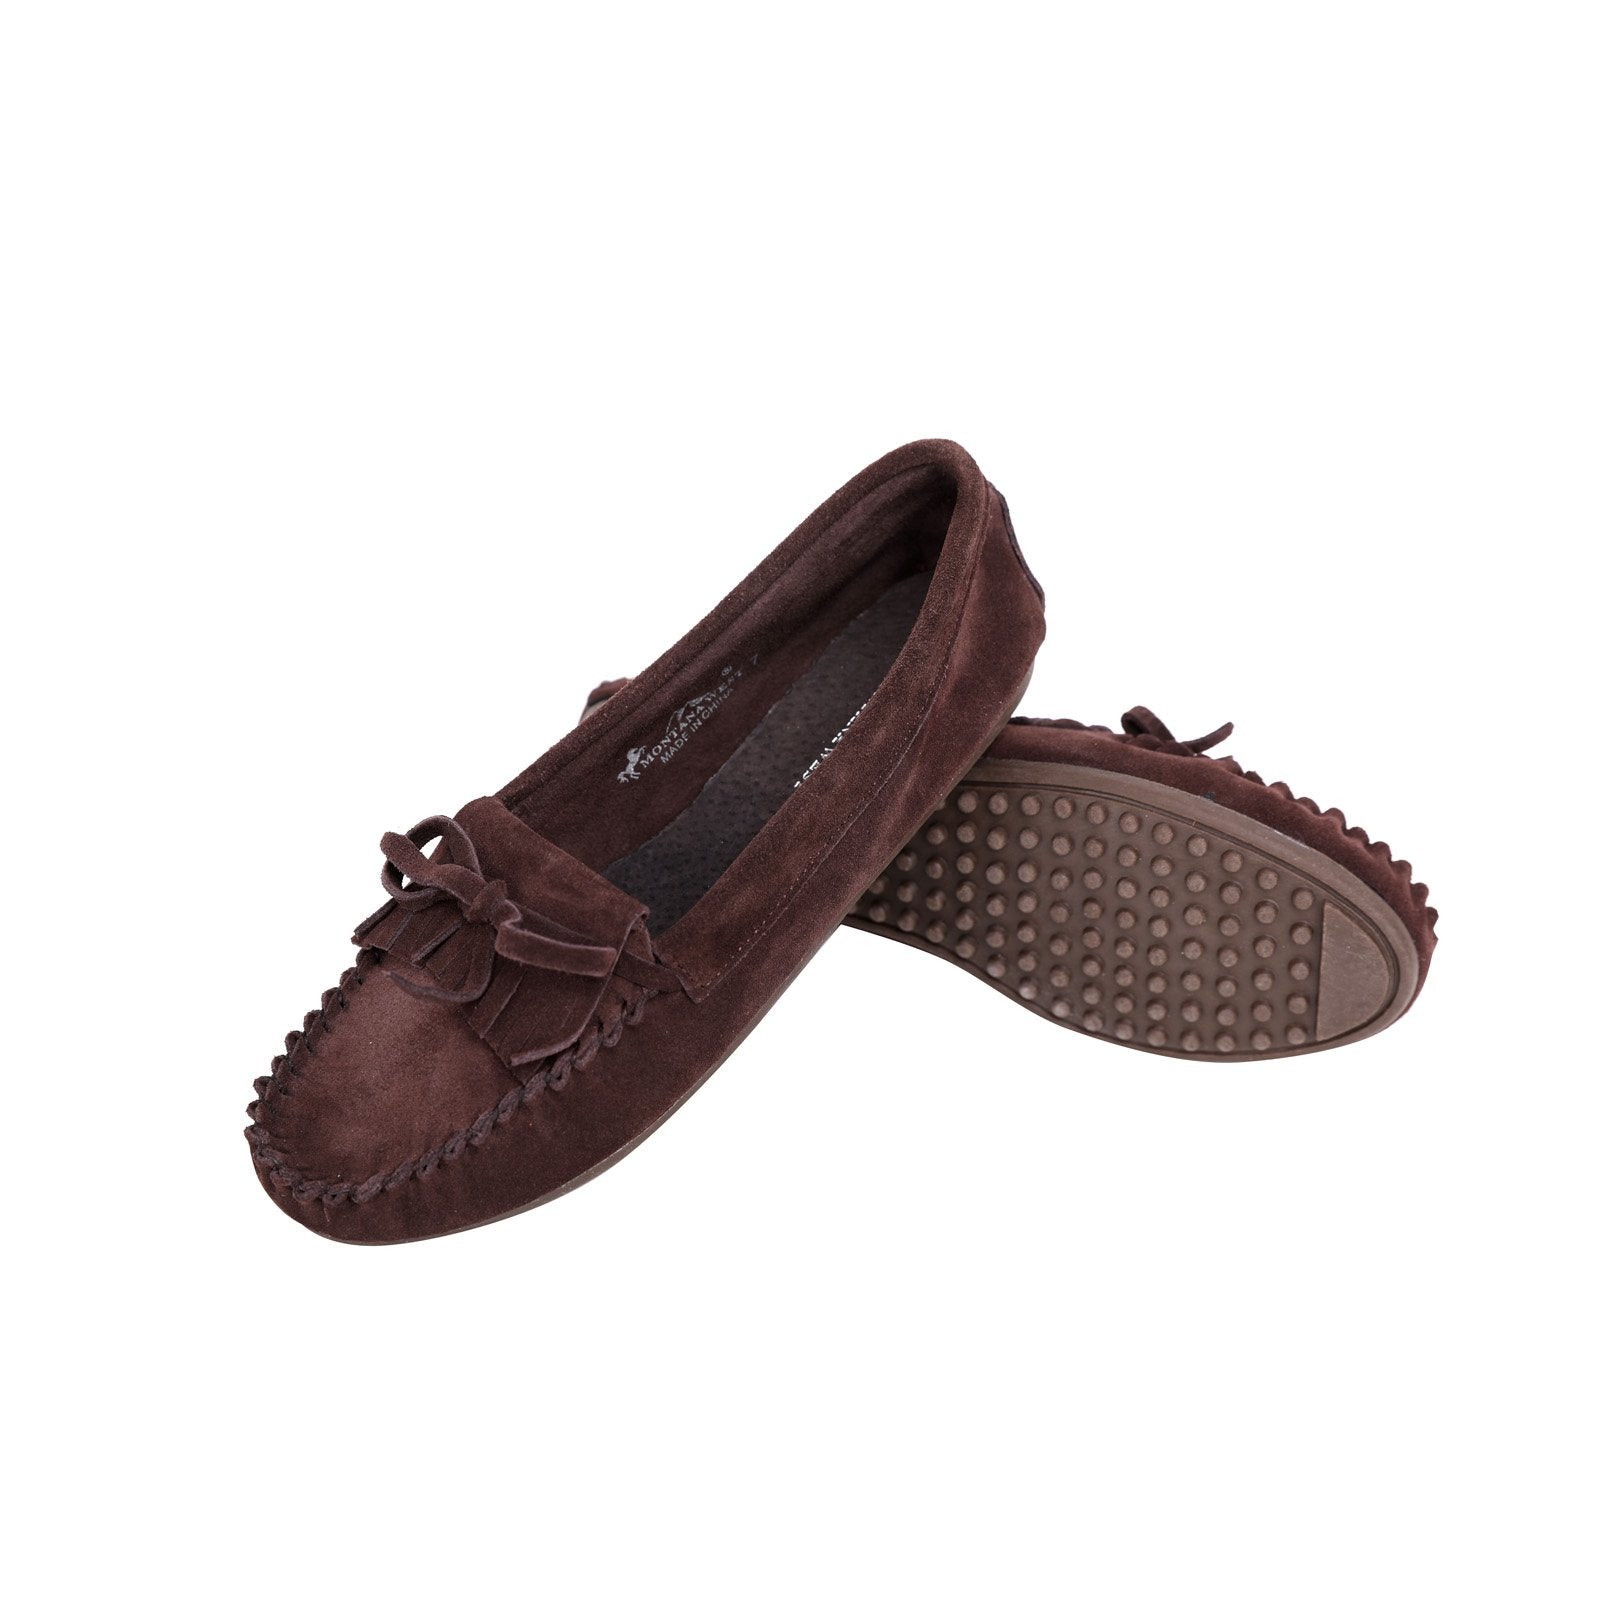 Leather Suede Moccasin Slipper - Montana West World